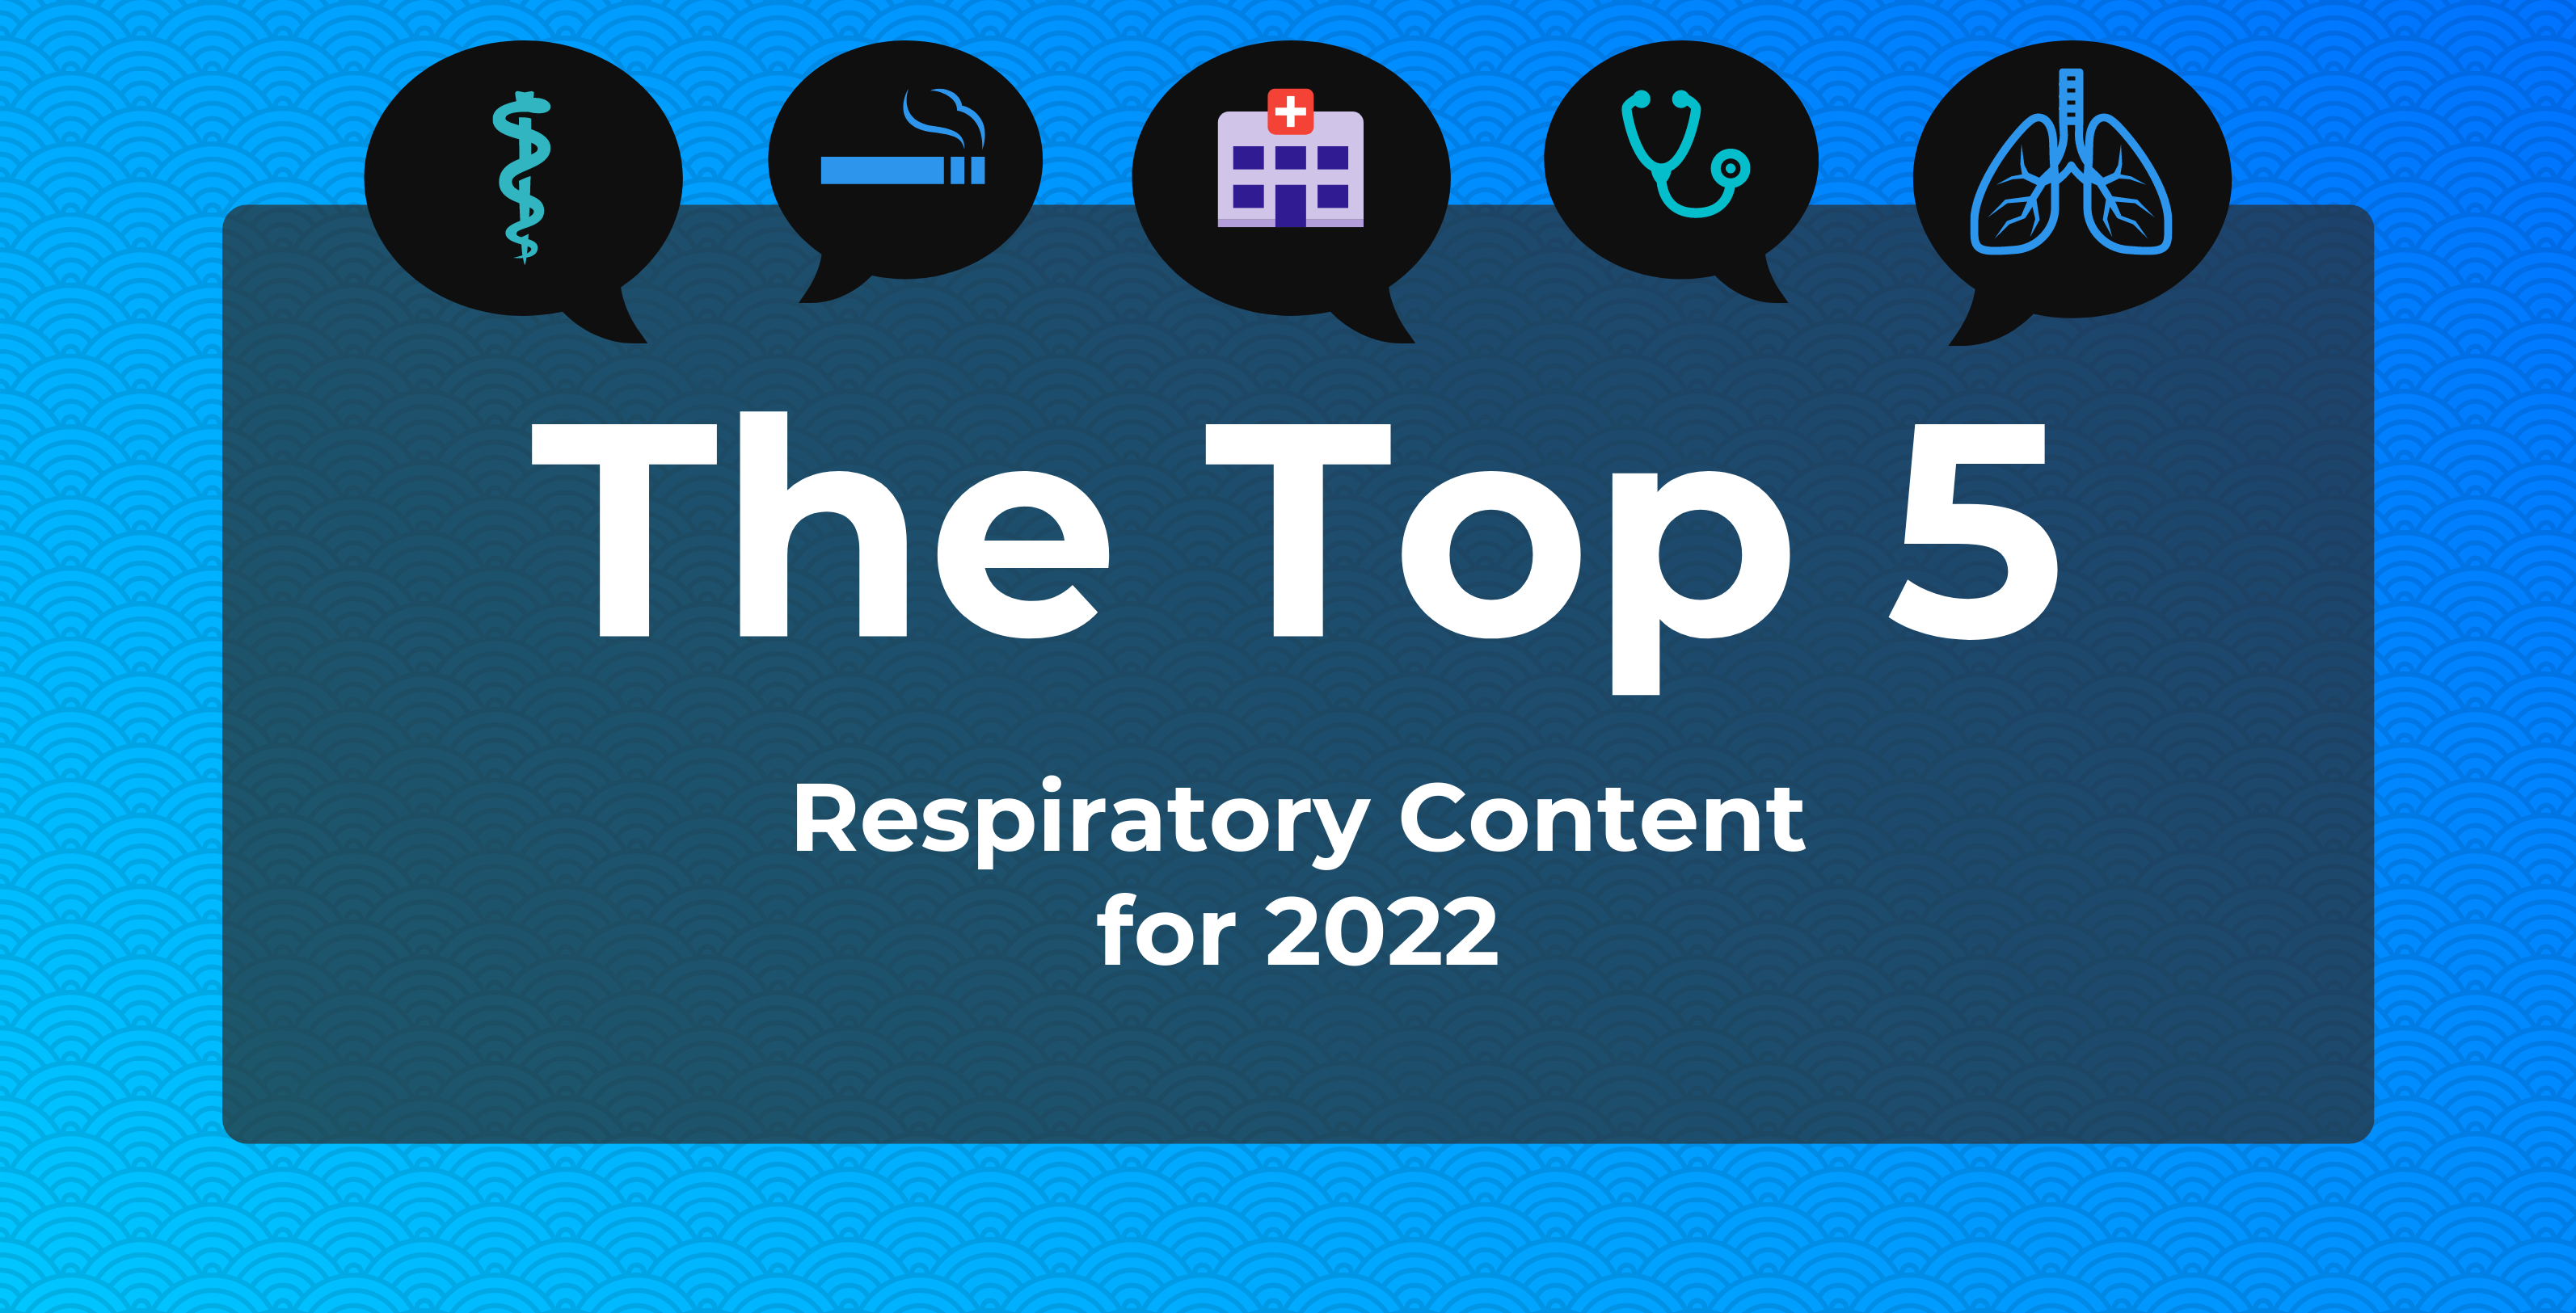 image with words "The Top 5 Respiratory Content for 2022"